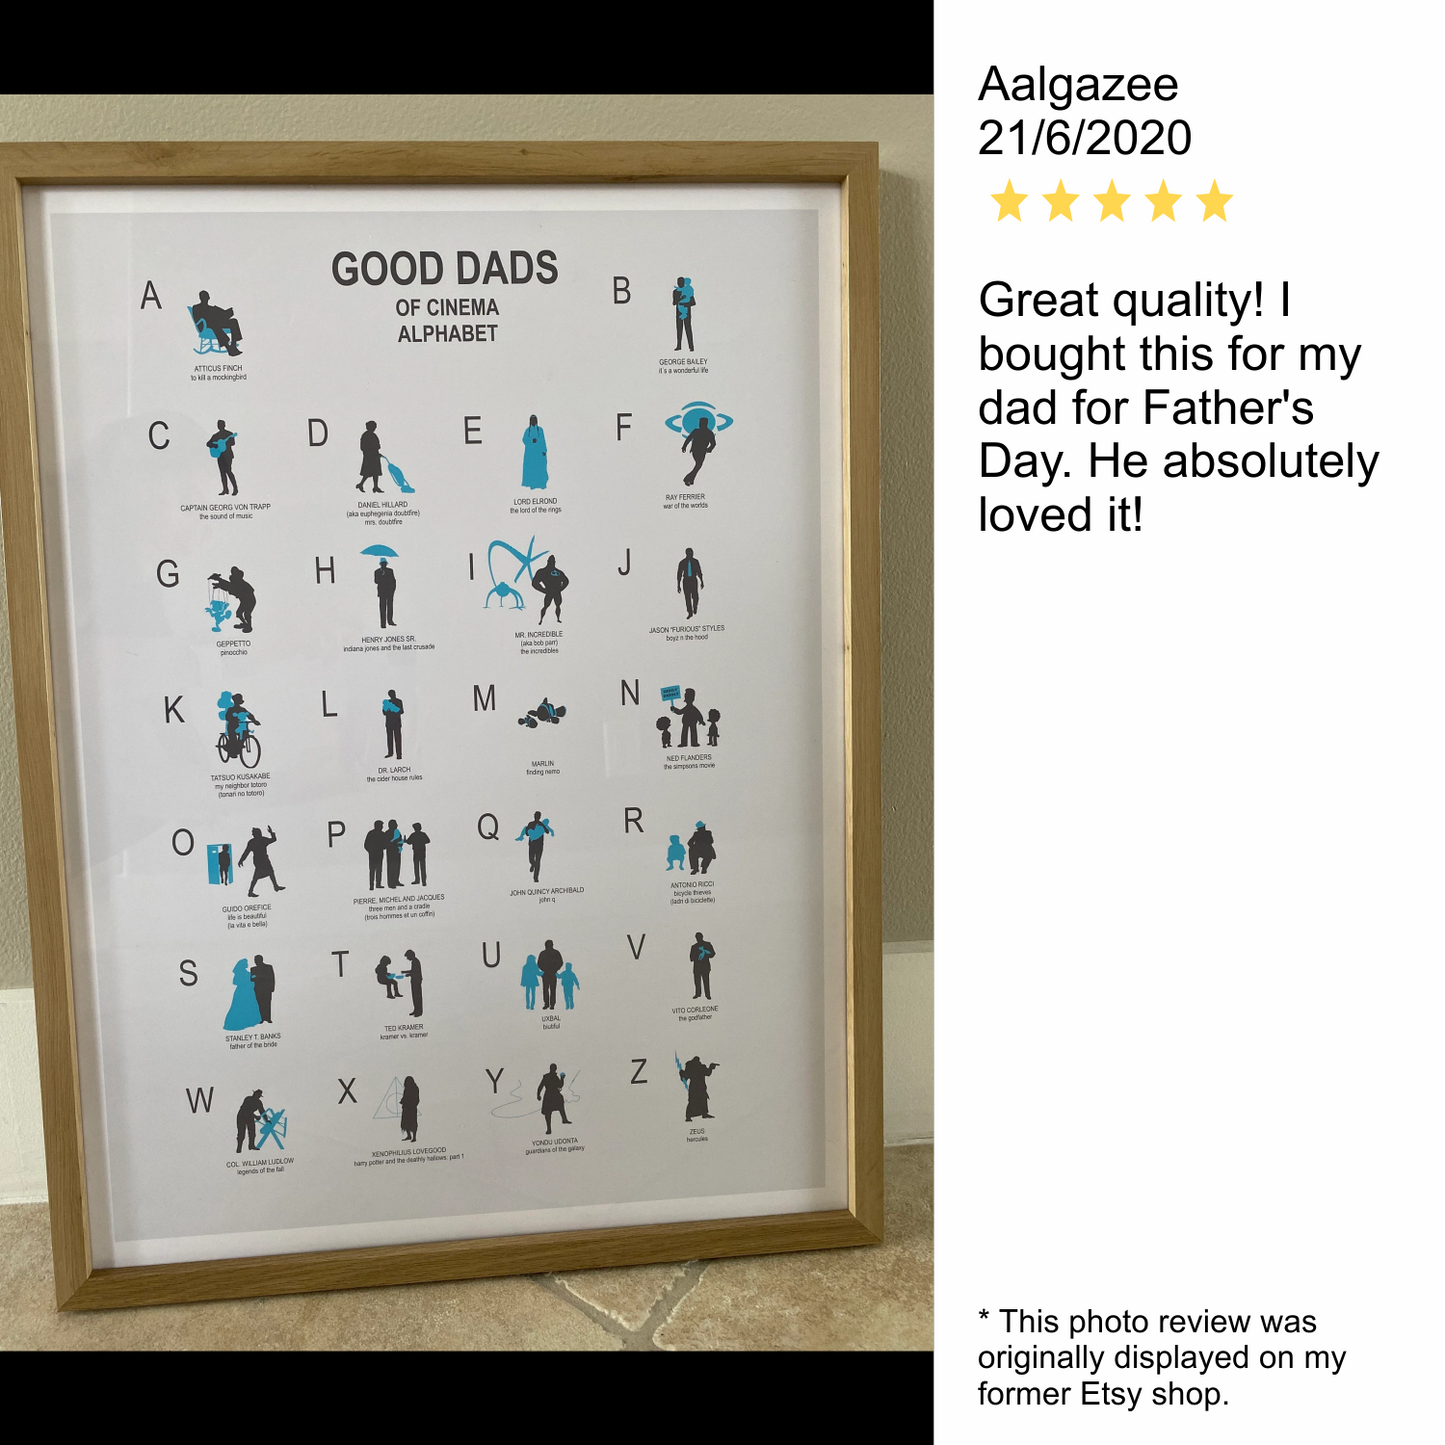 Dads in movies Abc Print Poster, Minimal poster, father's day gift